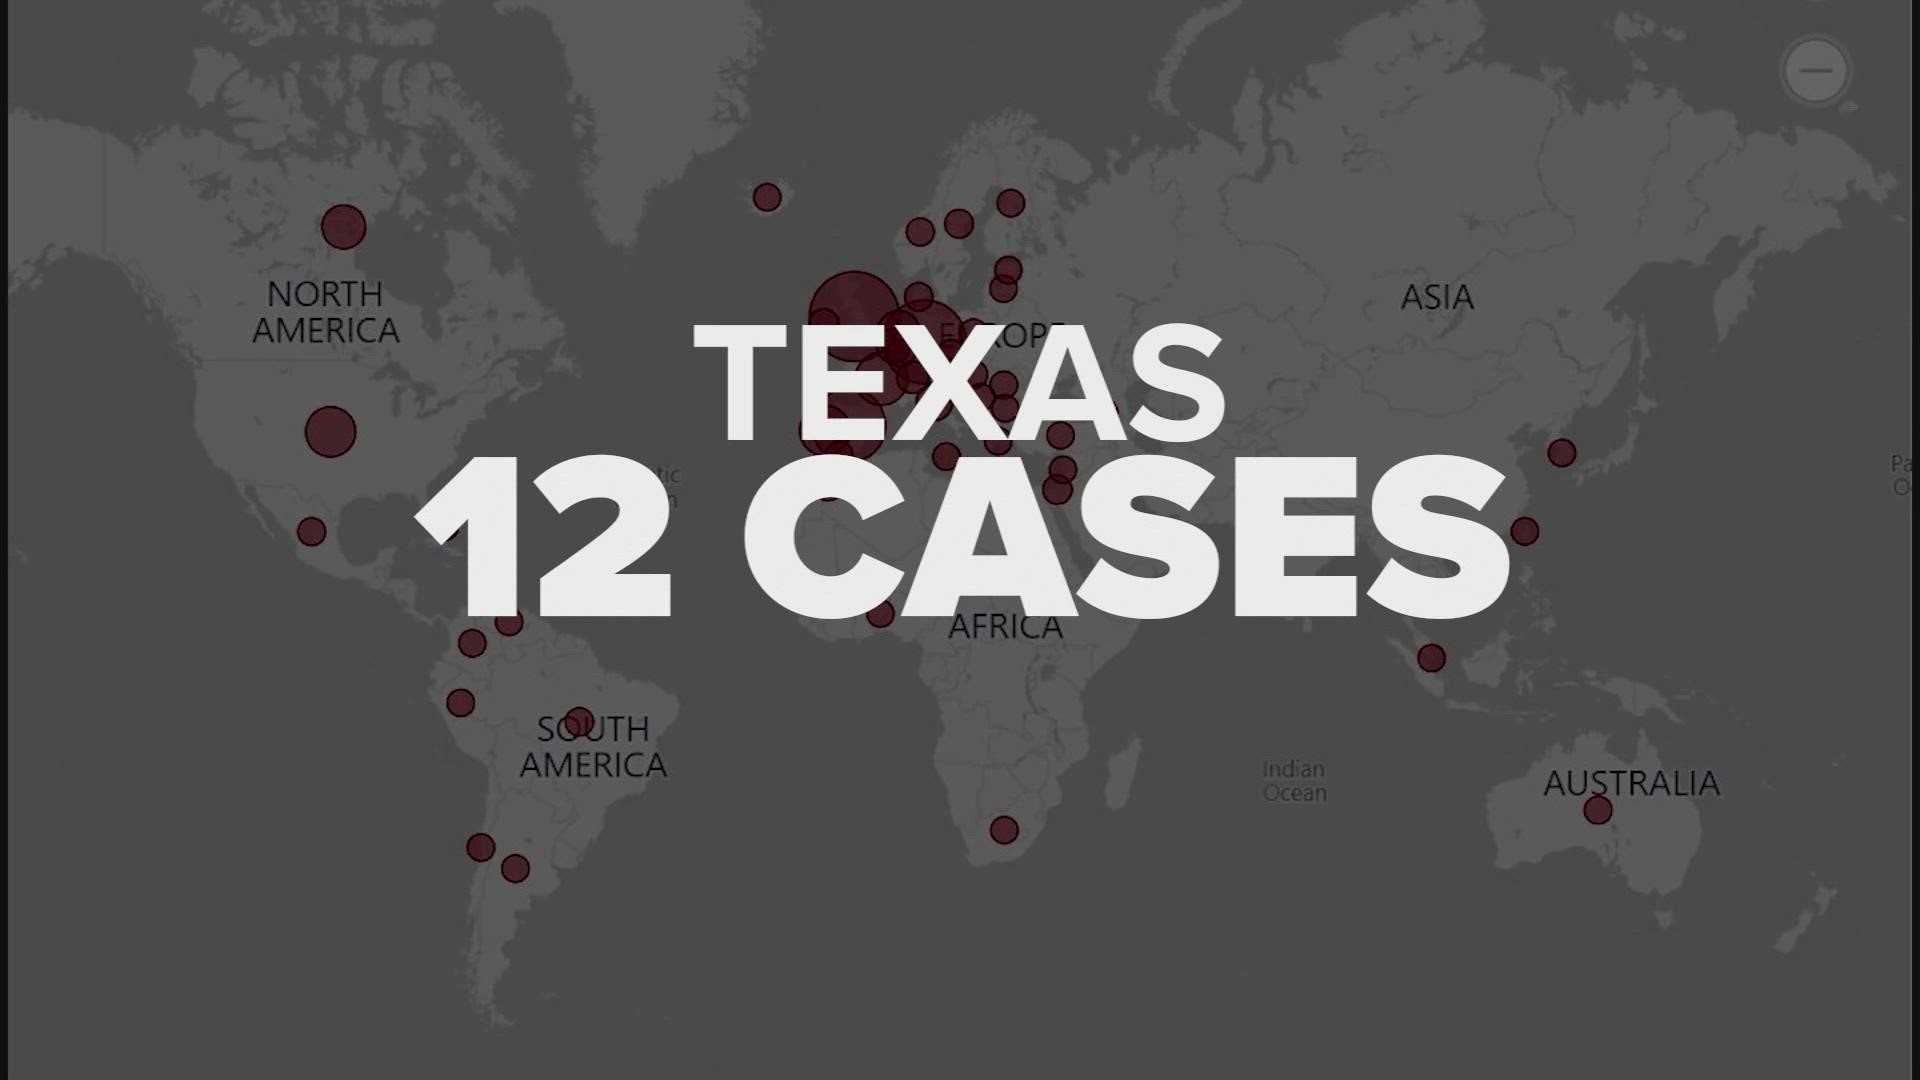 On Thursday, more cases of monkeypox were confirmed in Texas.